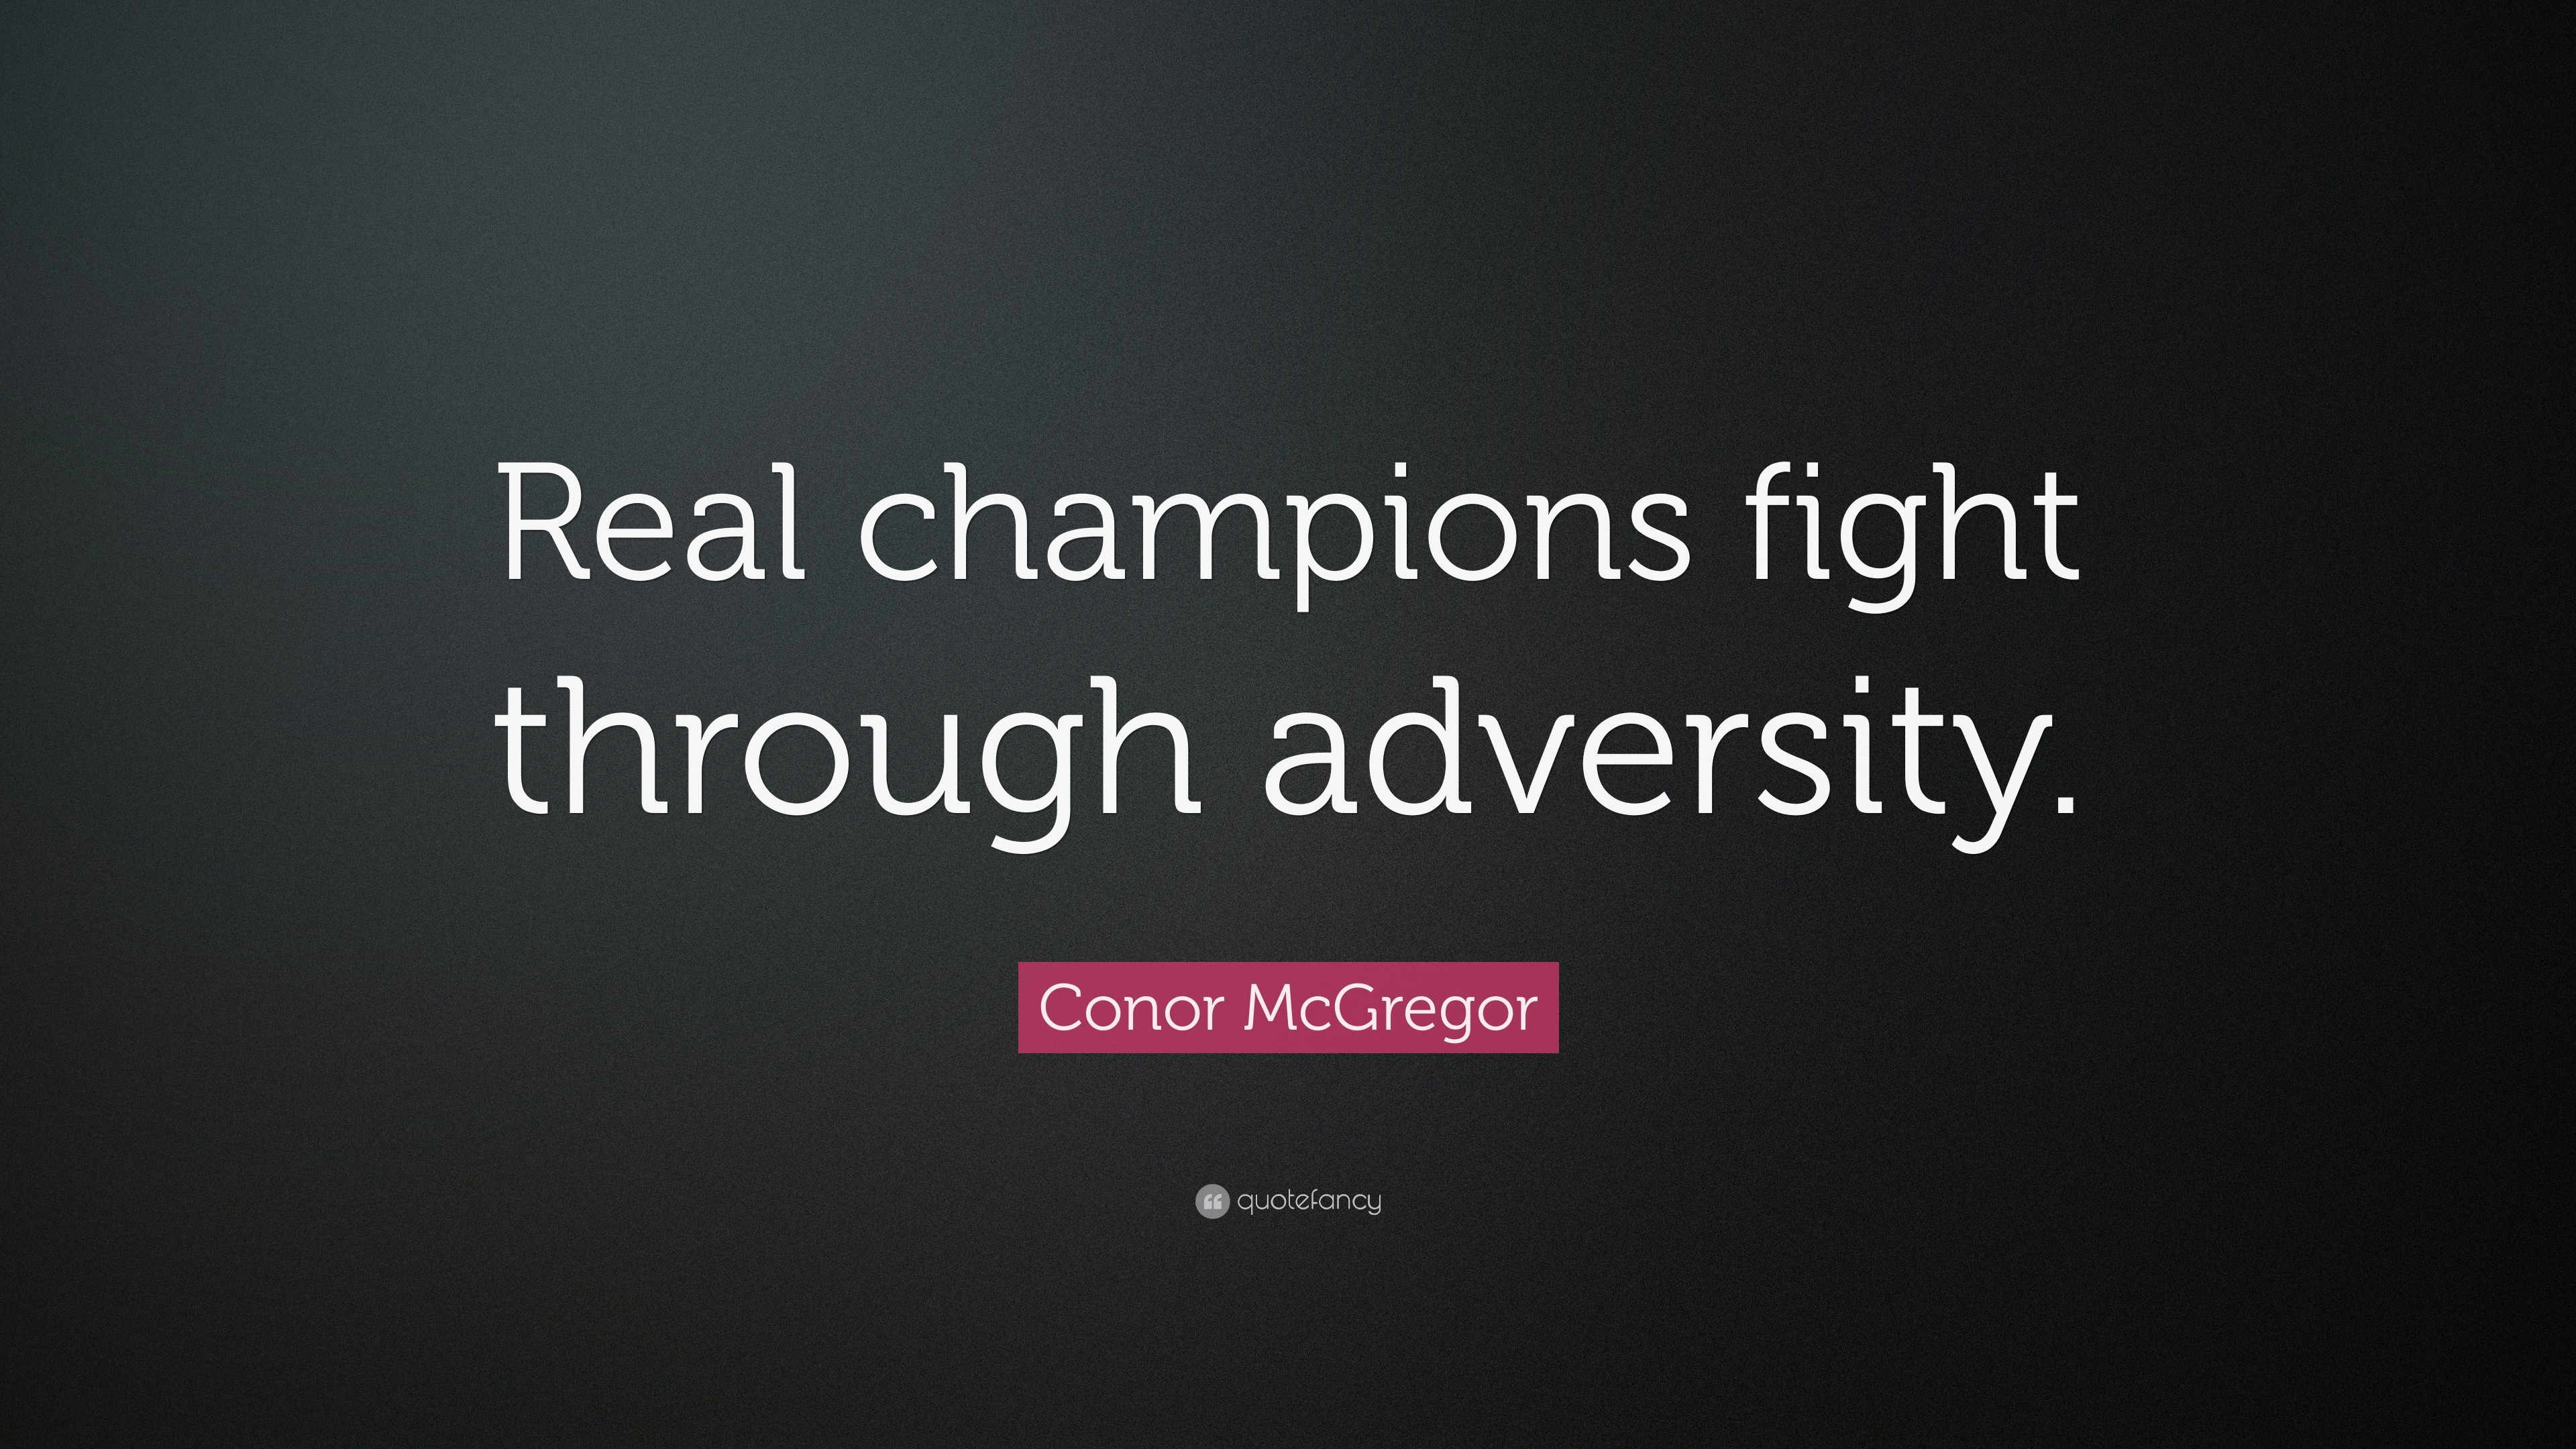 Conor McGregor Quote: “Real champions fight through adversity.”